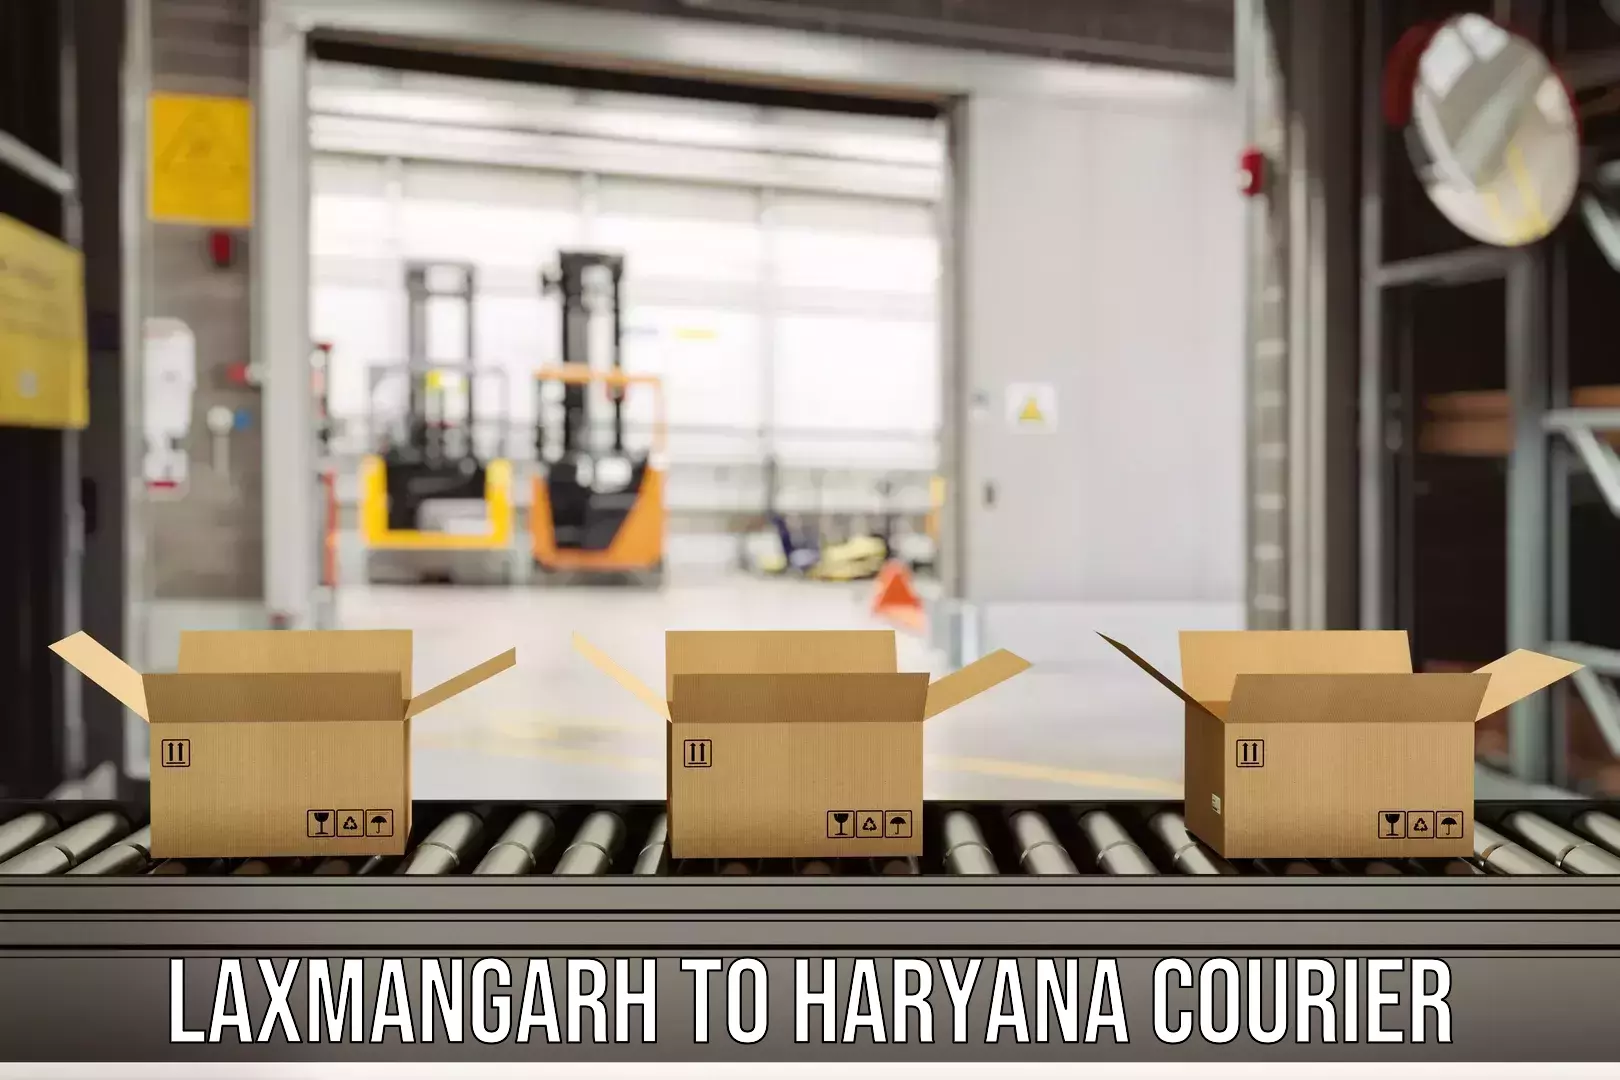 Multi-service courier options Laxmangarh to Chaudhary Charan Singh Haryana Agricultural University Hisar